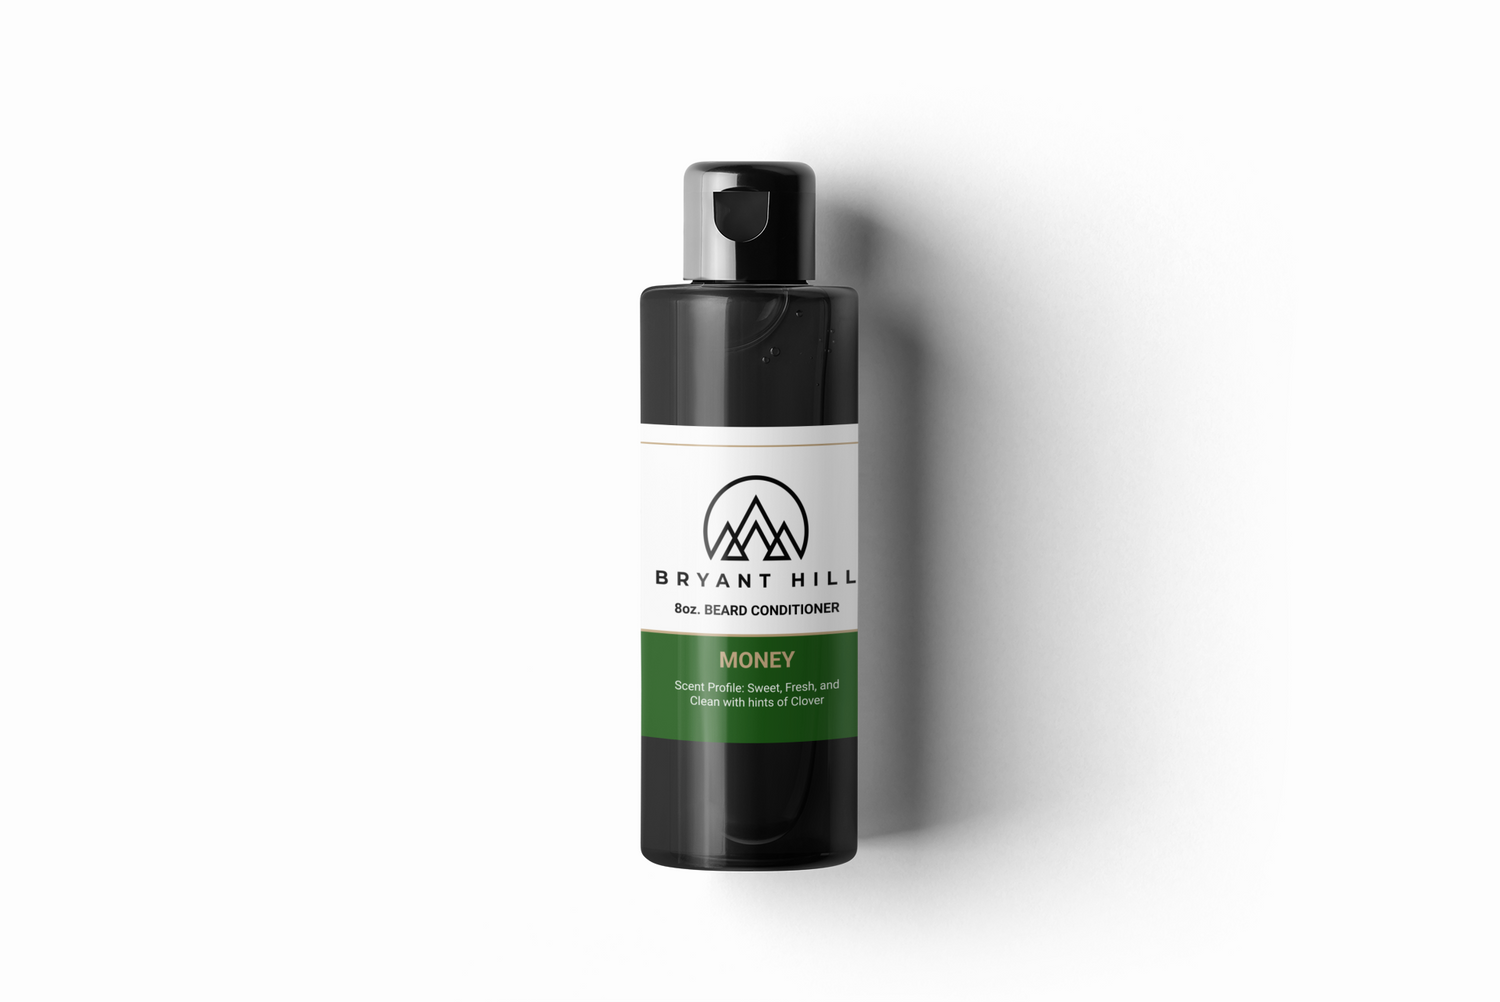 BRYANT-HILL-ALL-NATURAL-ORGANIC-BEARD-CONDITIONER-MONEY